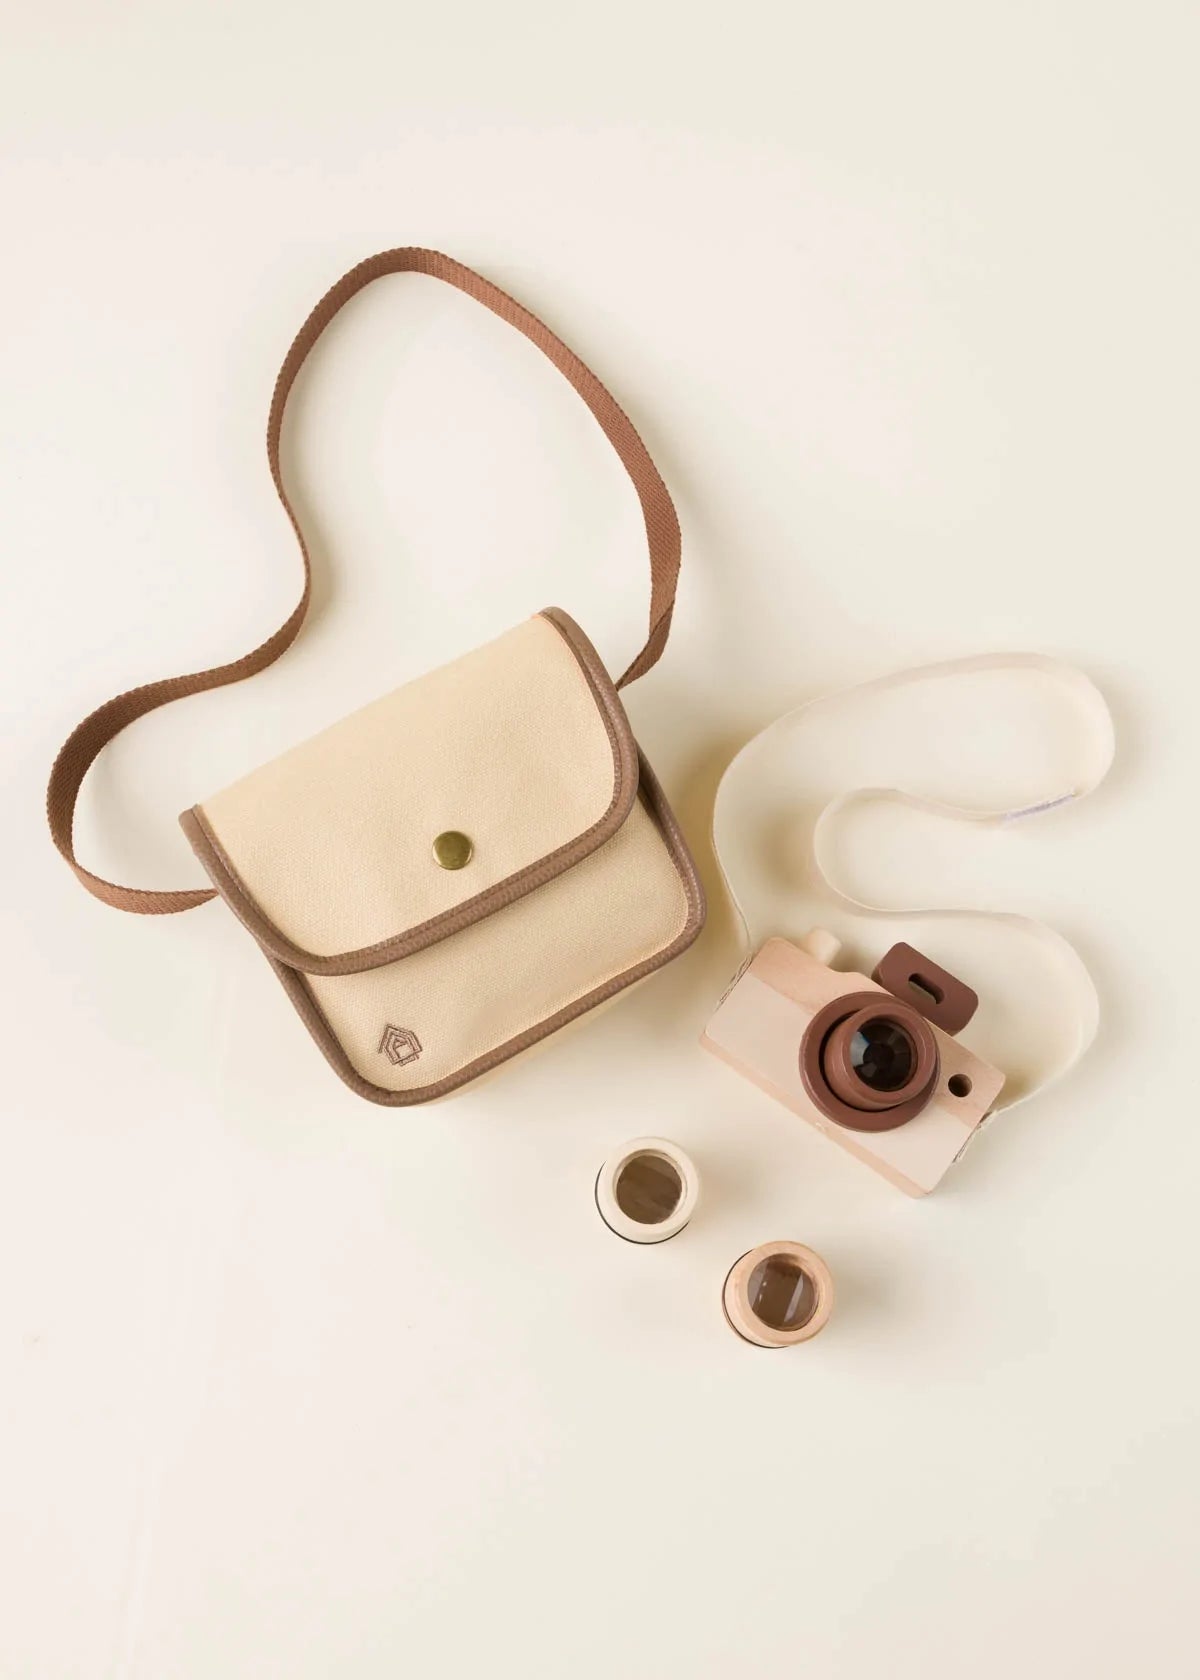 Wooden toy camera and bag with sleek design, from cocovillage